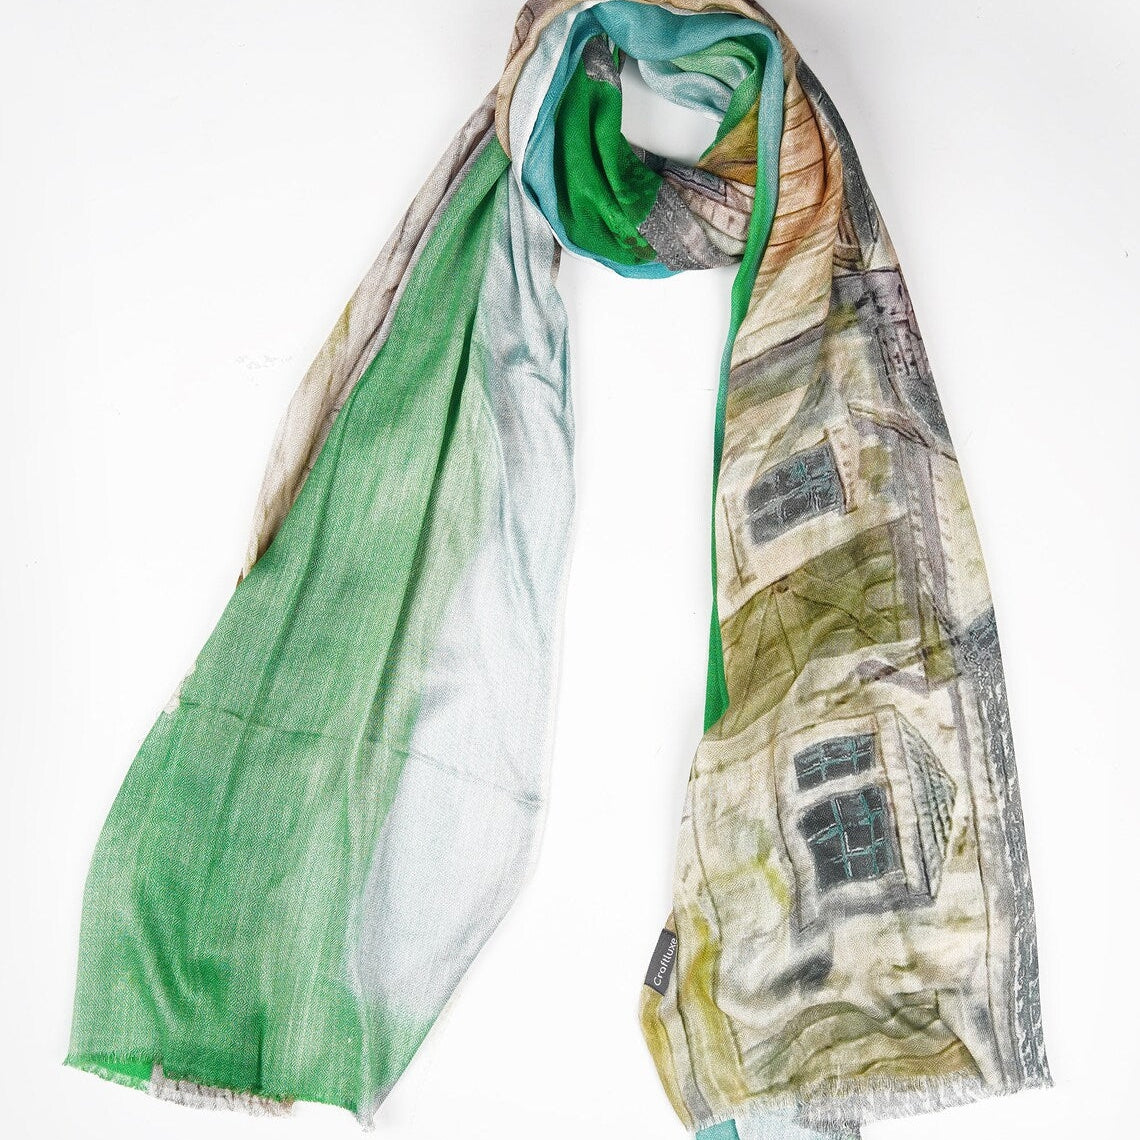 Silk Modal Scarf, long all season scarf in luxurious fabric blend, shawl and wrap, accessories for women, gifts for her, summer scarf, shawl - Green/Cream